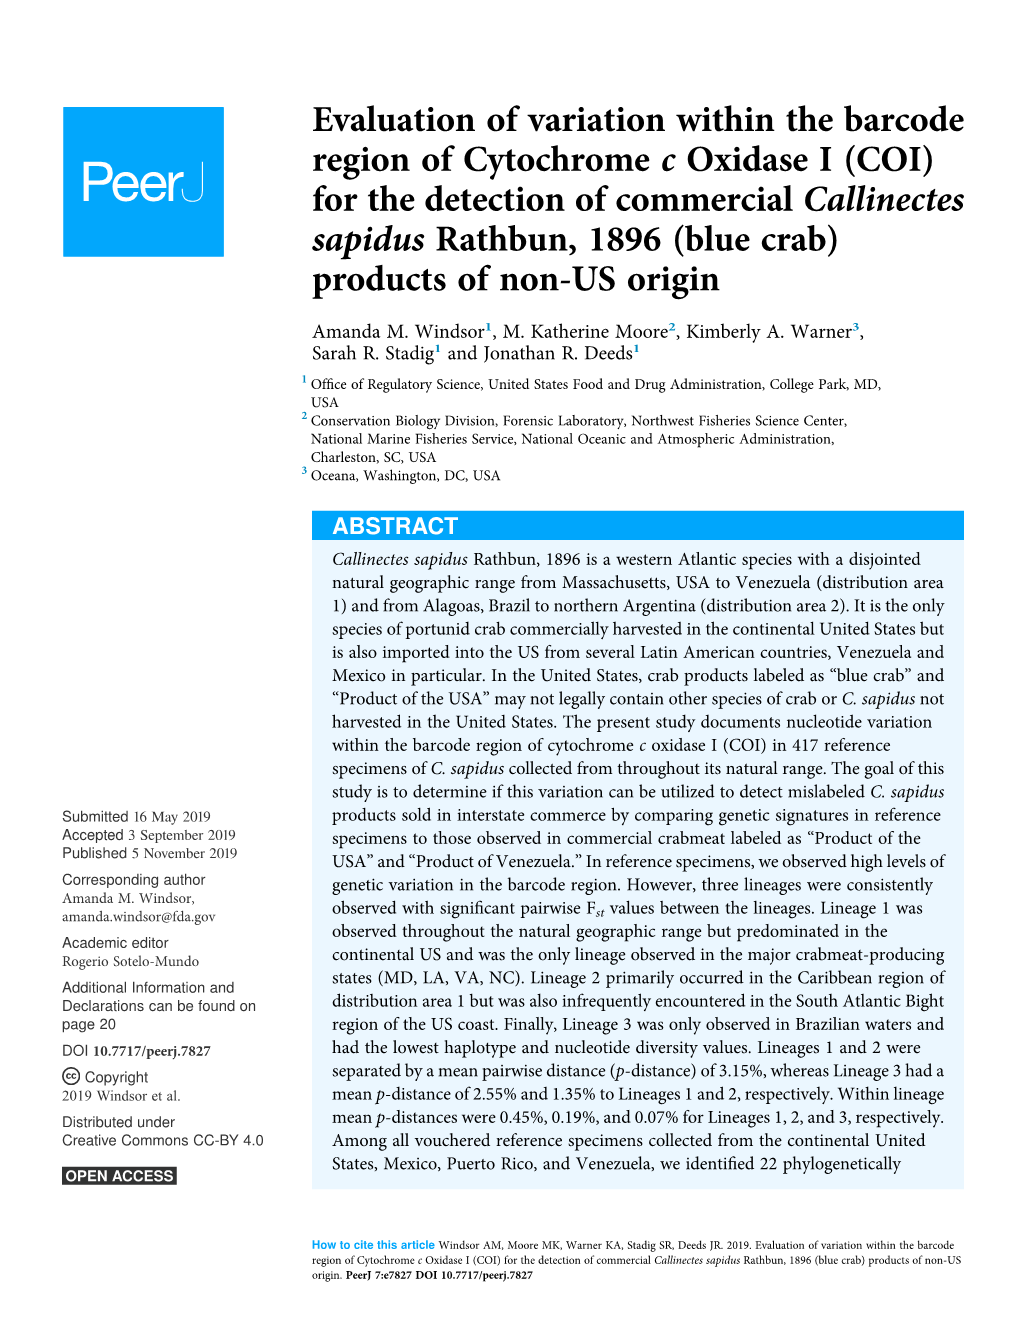 COI) for the Detection of Commercial Callinectes Sapidus Rathbun, 1896 (Blue Crab) Products of Non-US Origin